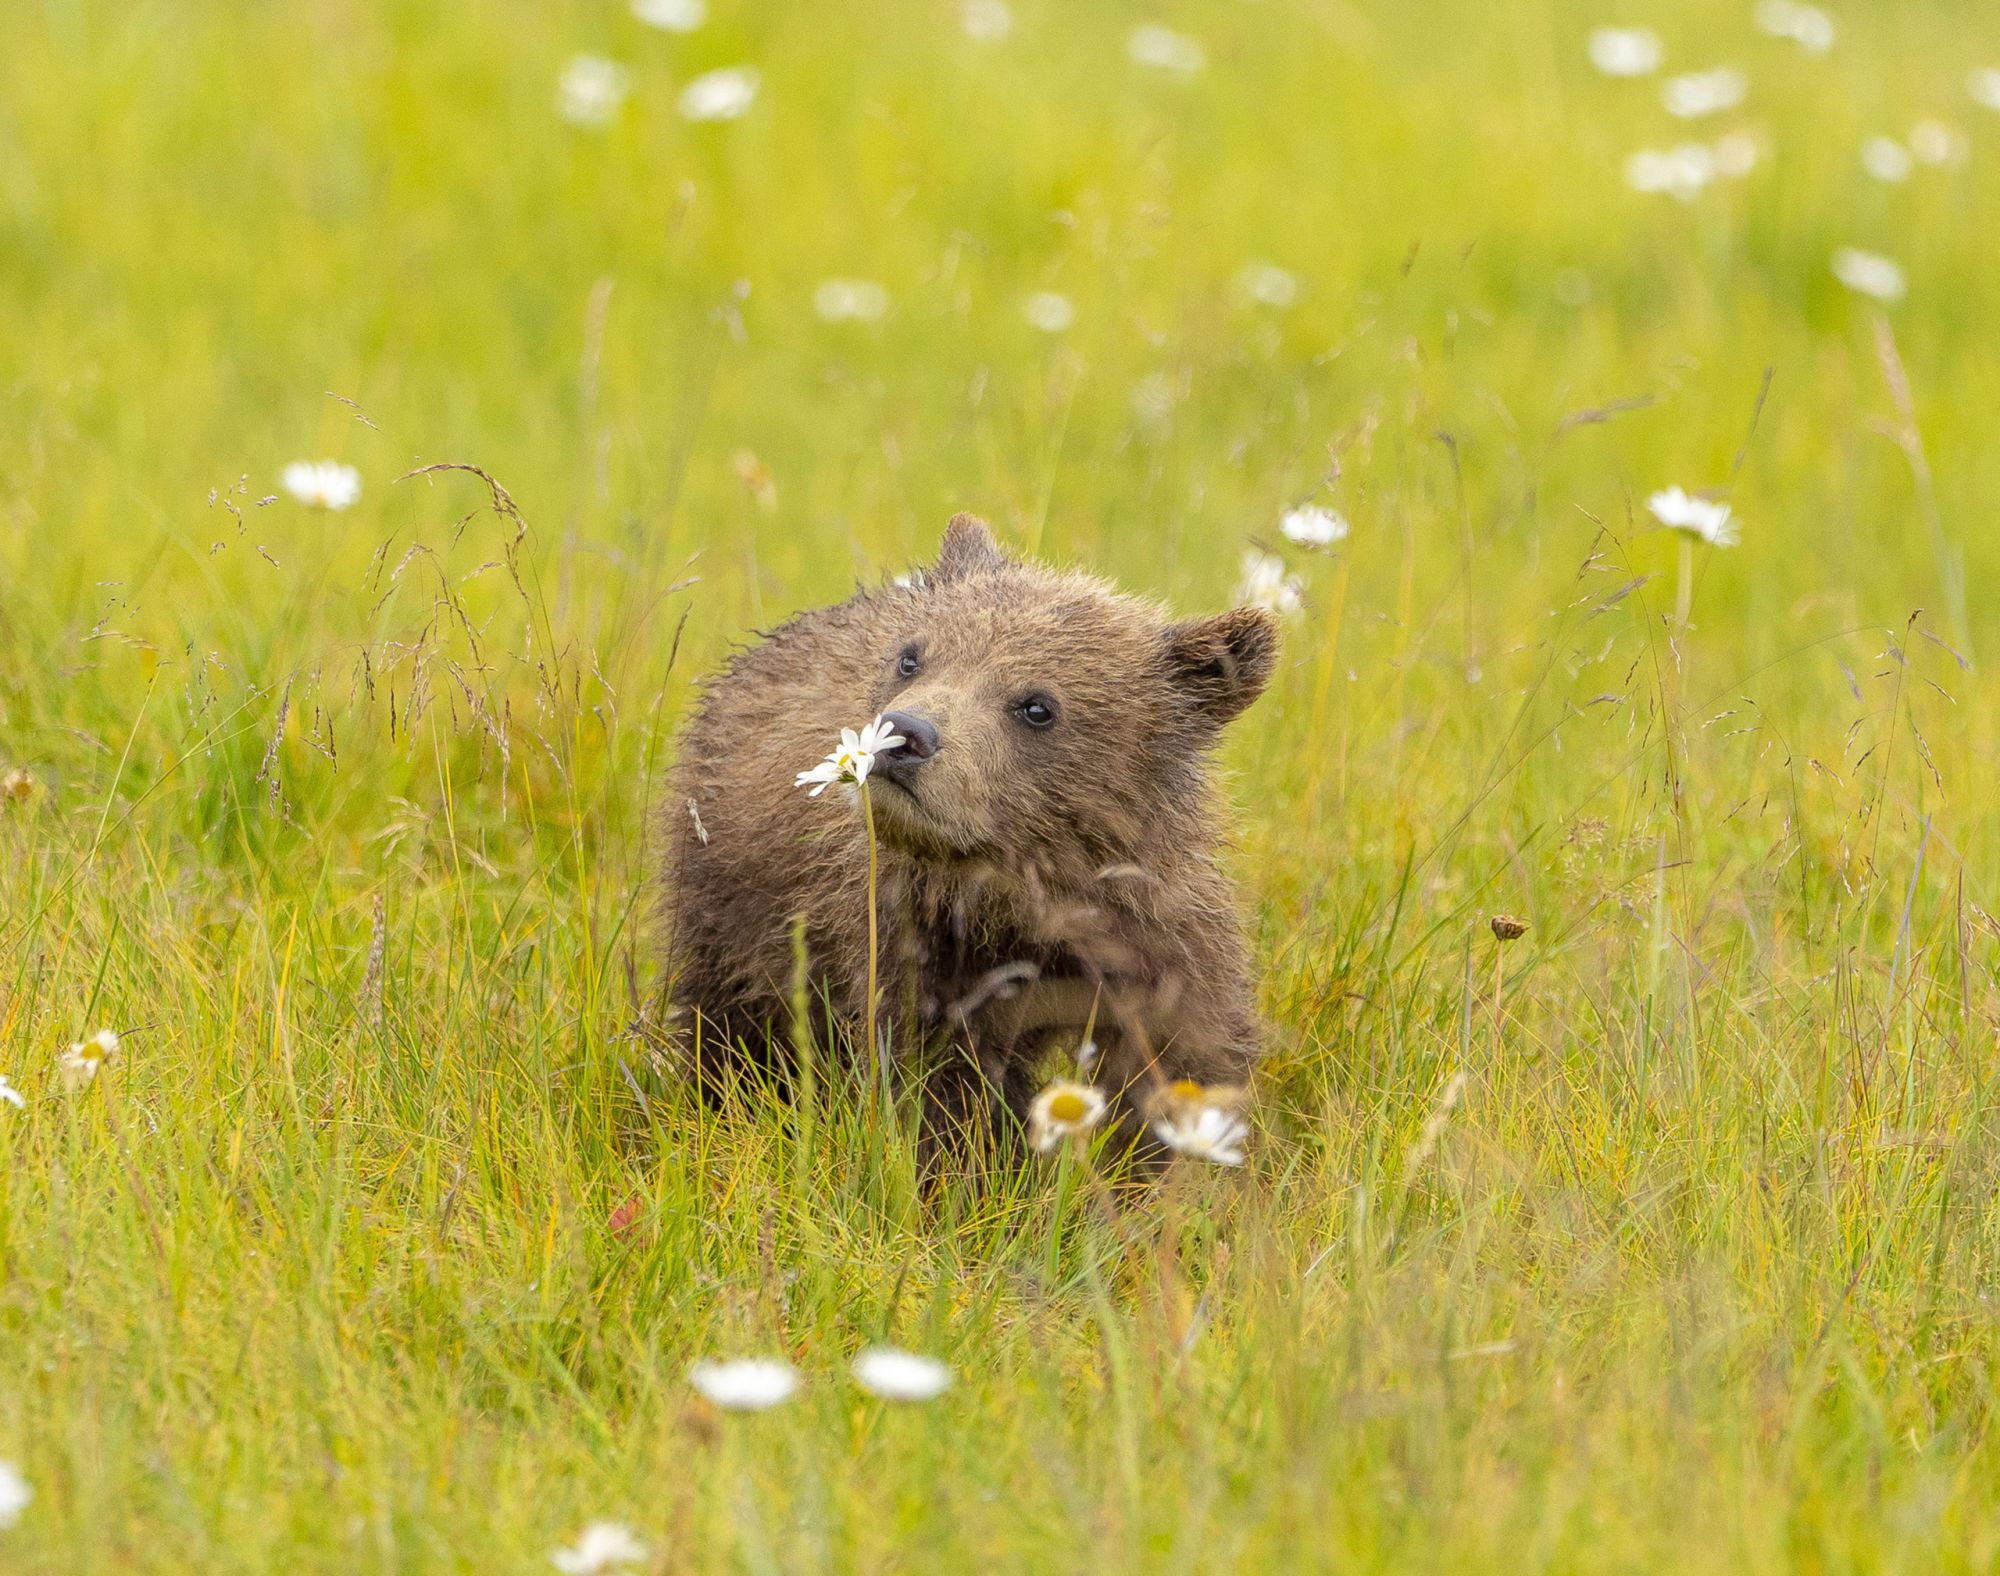 CATERS_BEAR_CUB_SNIFFING_FLOWER_001_3453497-scaled.jpg